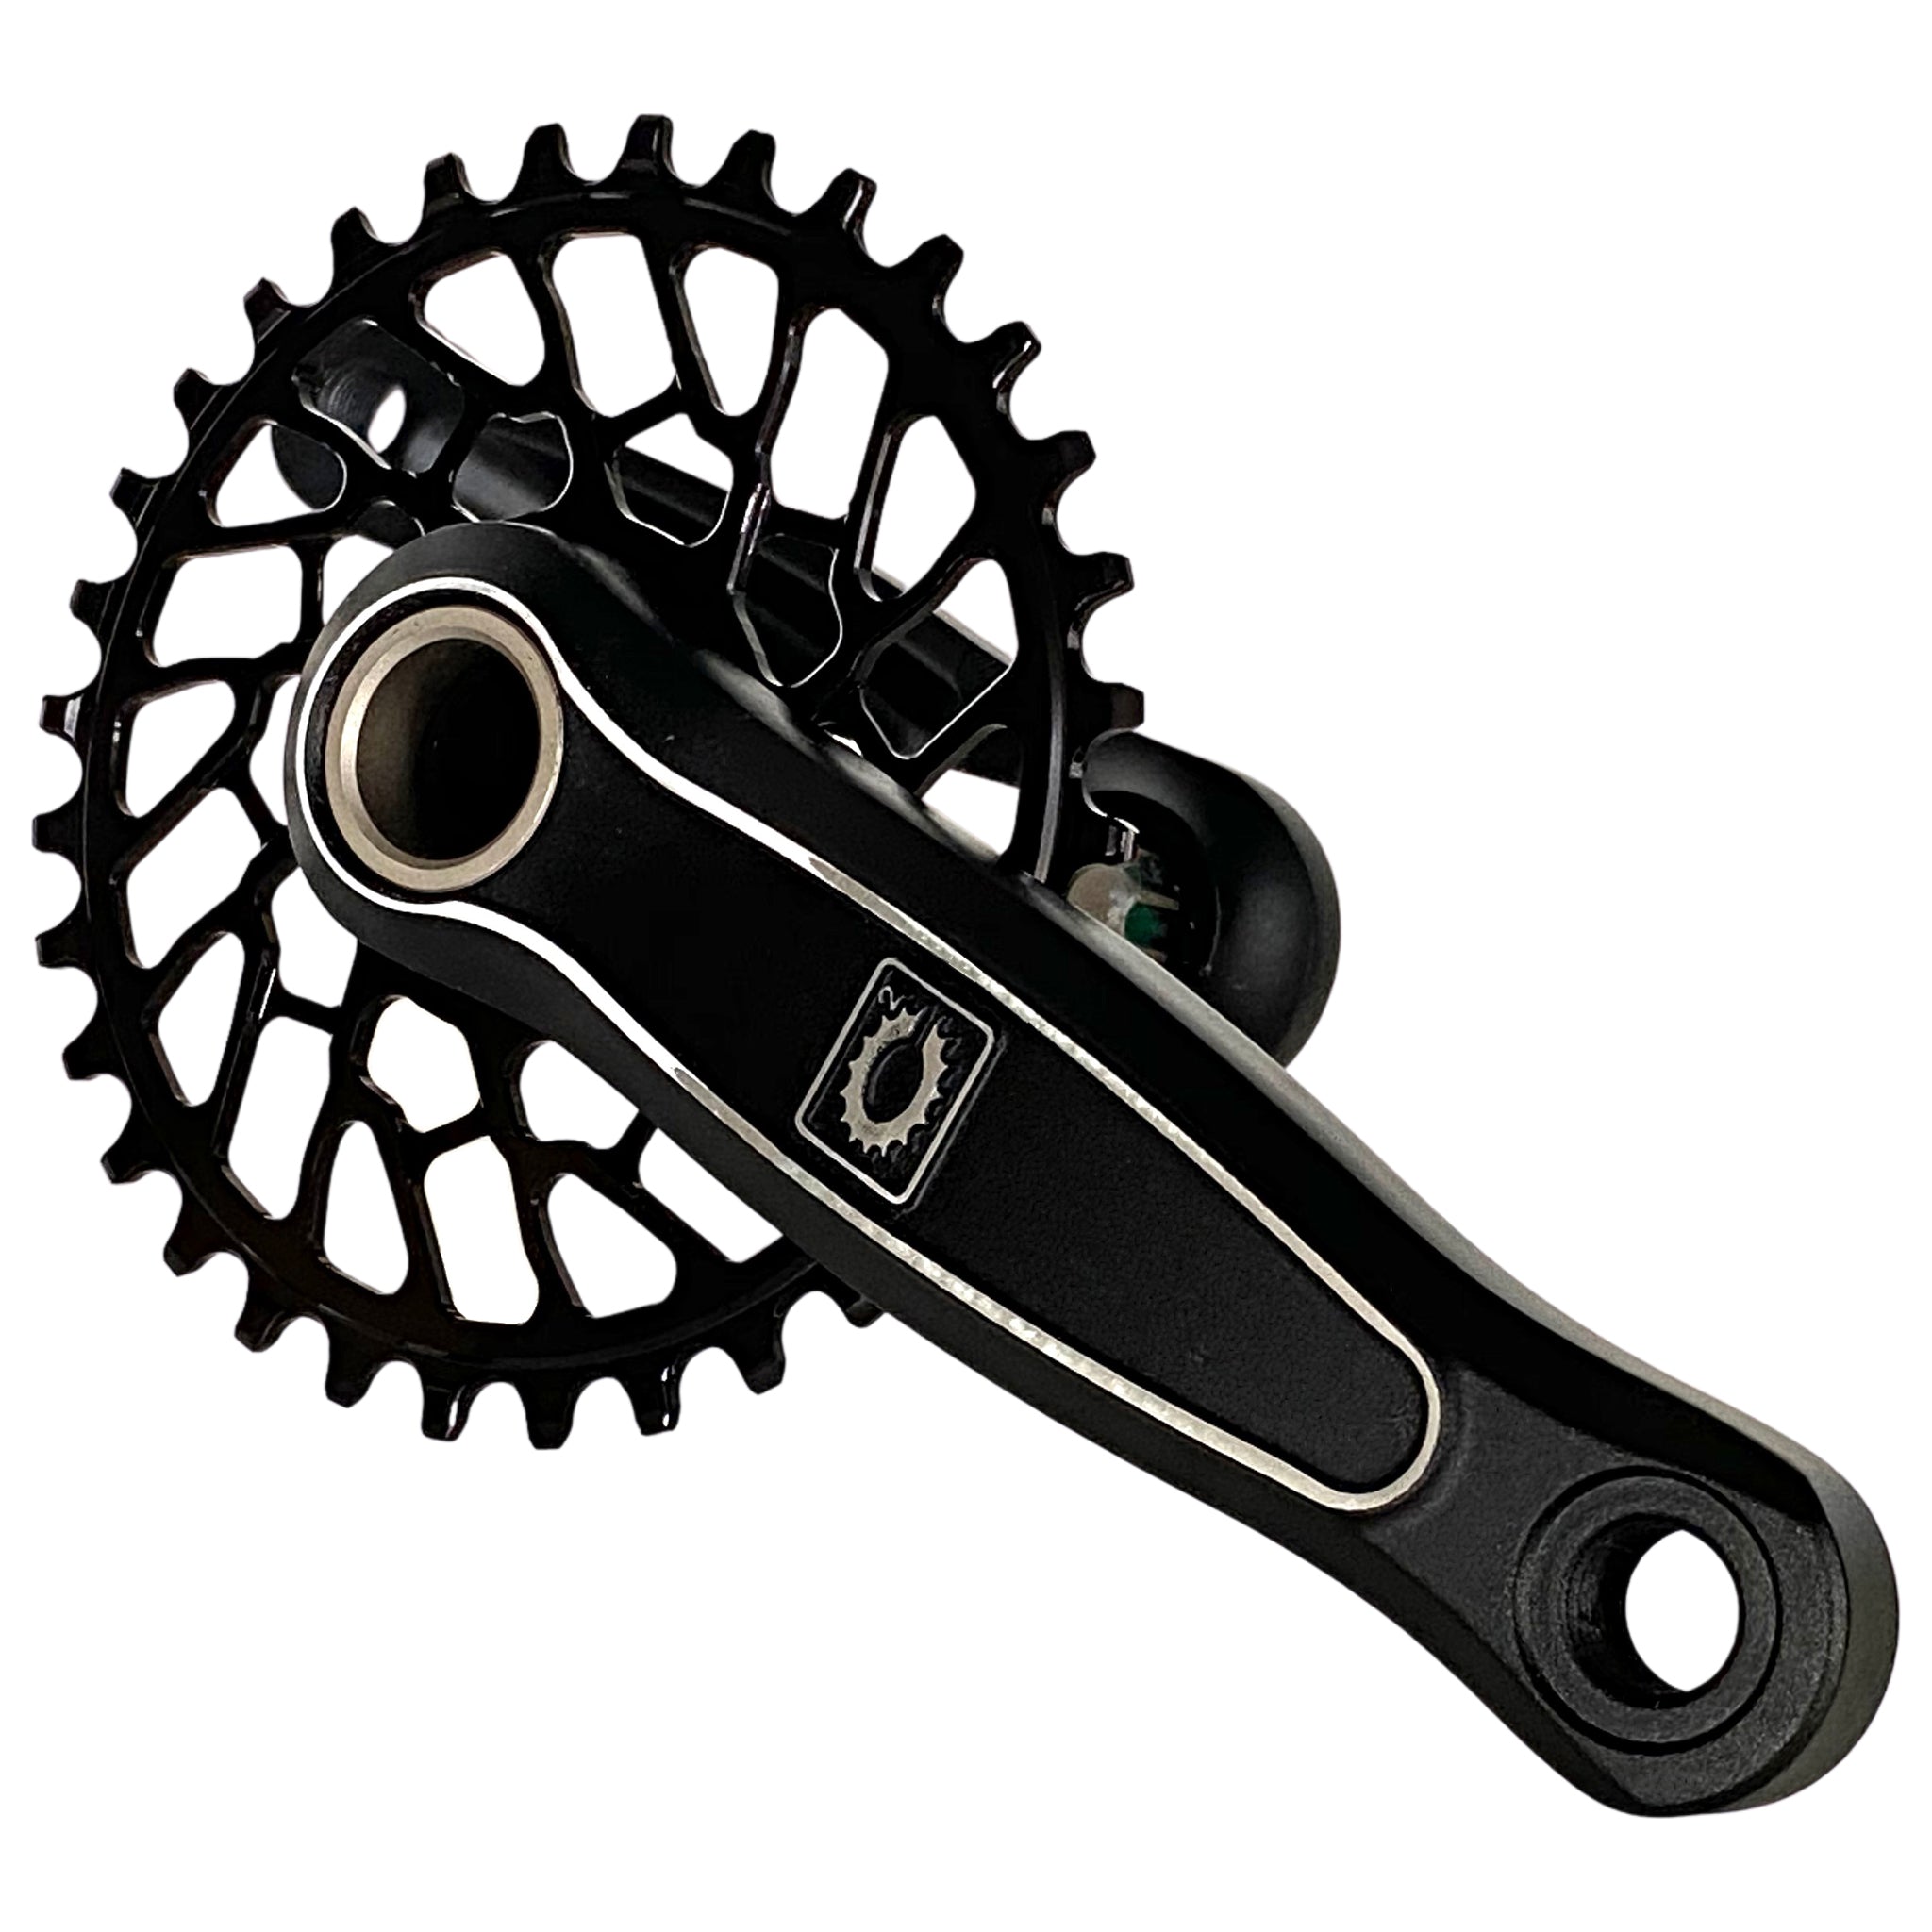 Why You Should Use Shorter Crank Arms on Your Mountain Bike